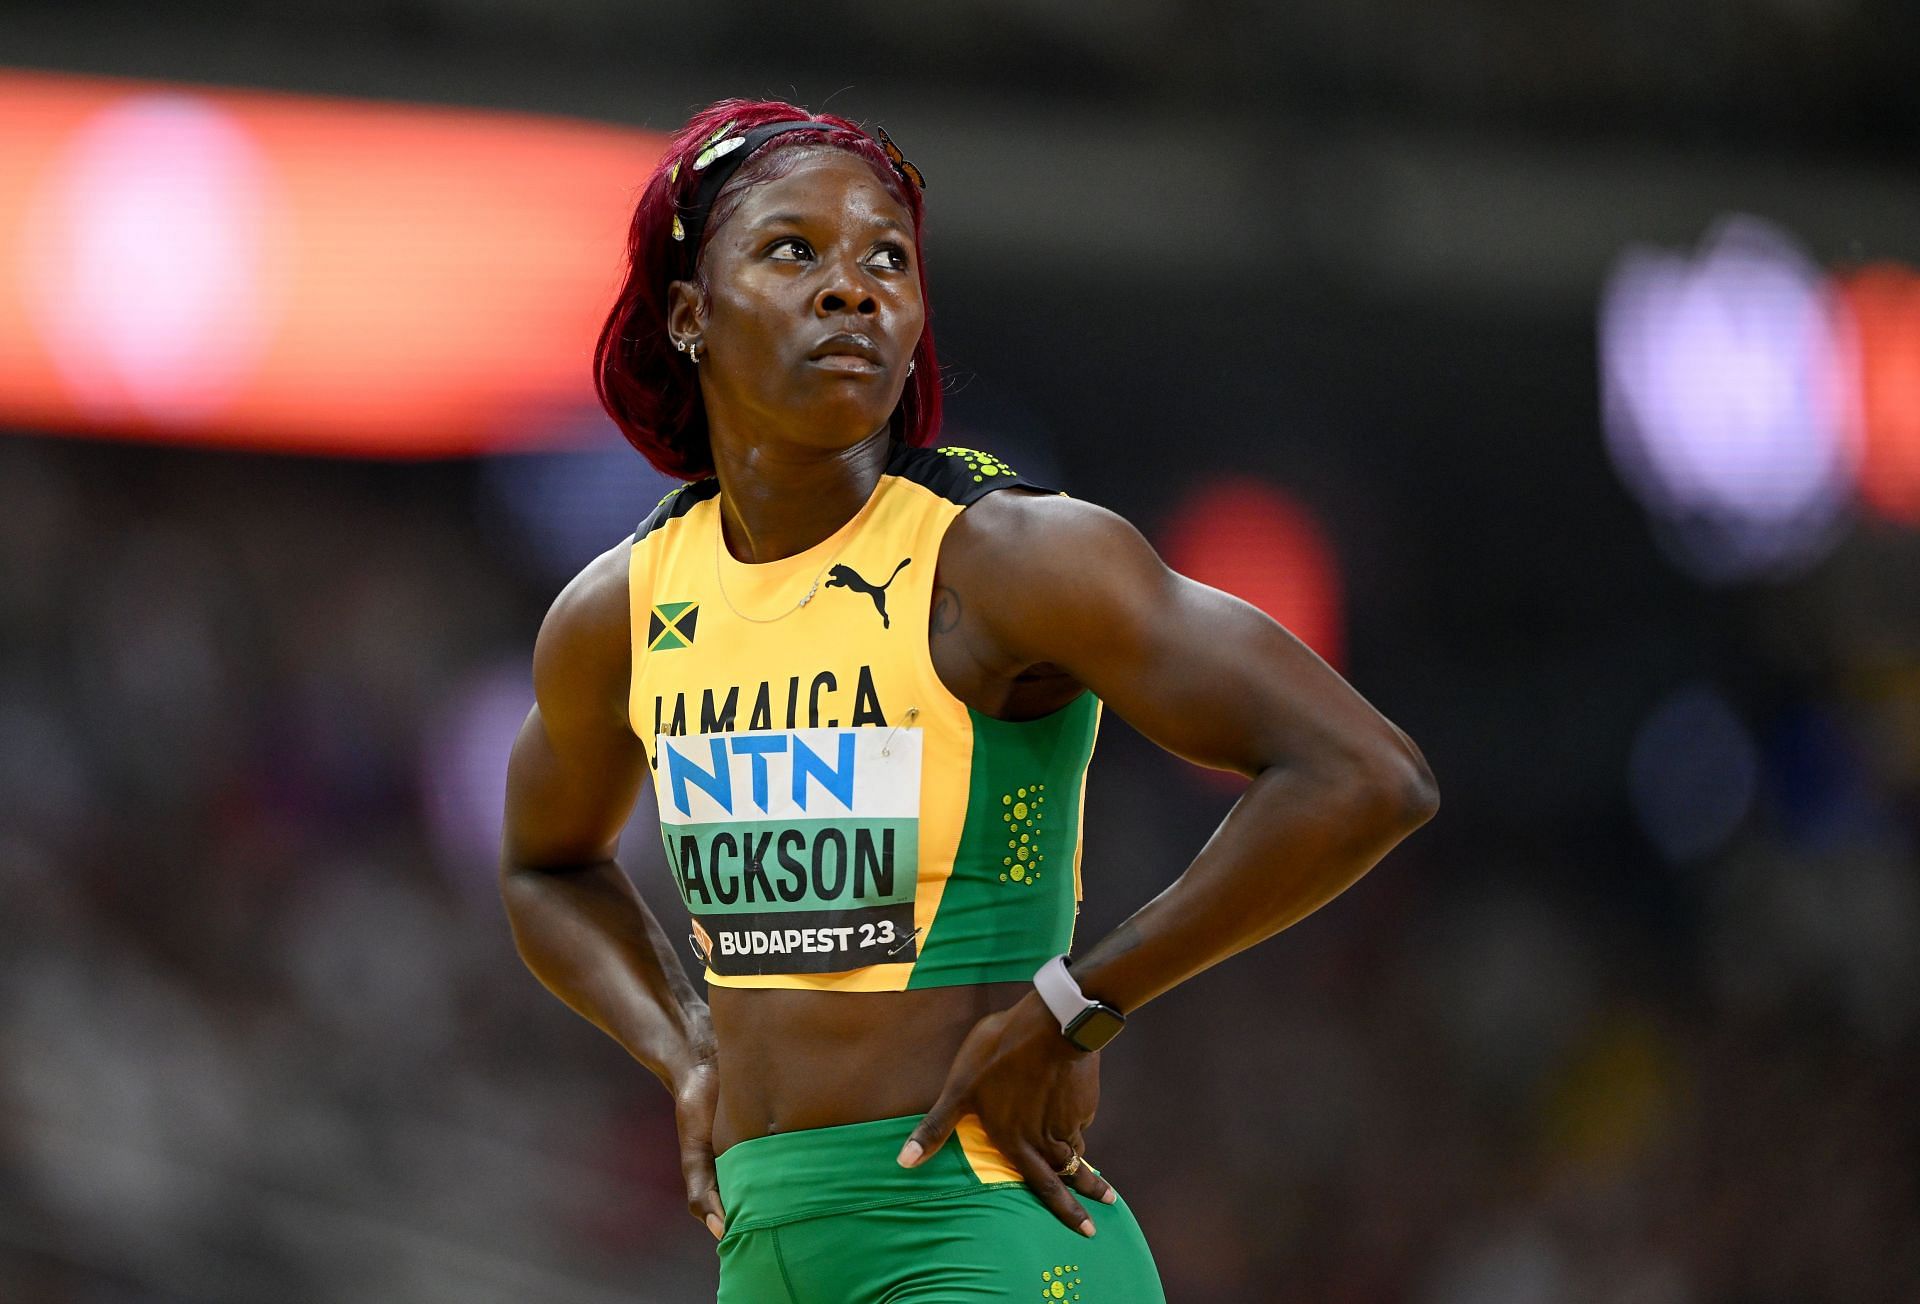 Shericka Jackson after competing in the women&#039;s 100m semi-final at the 2023 World Athletics Championships in Budapest, Hungary